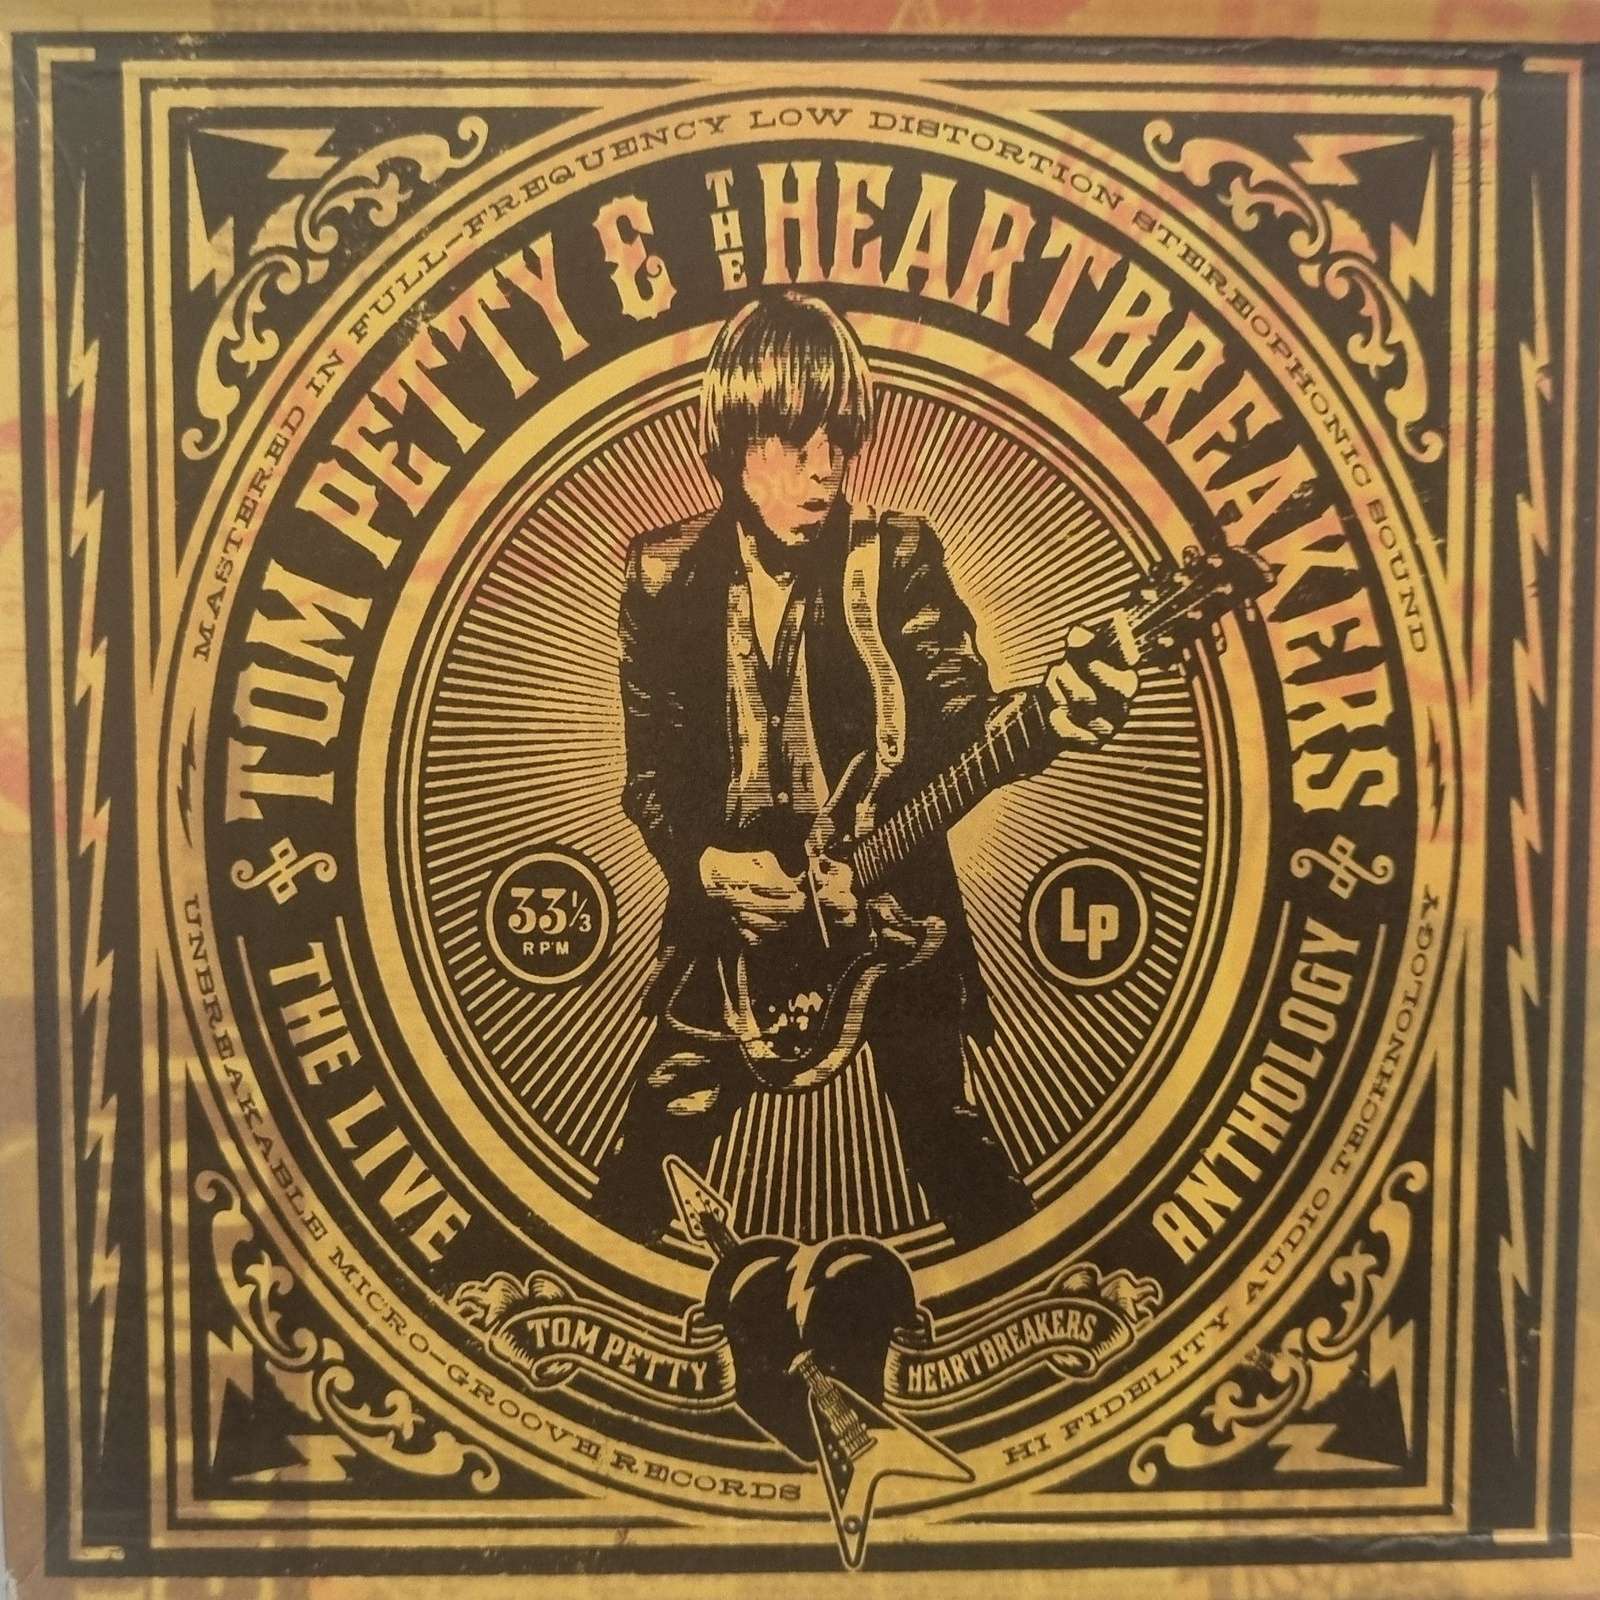 Tom Petty & the Heartbreakers - The Live Anthology CD